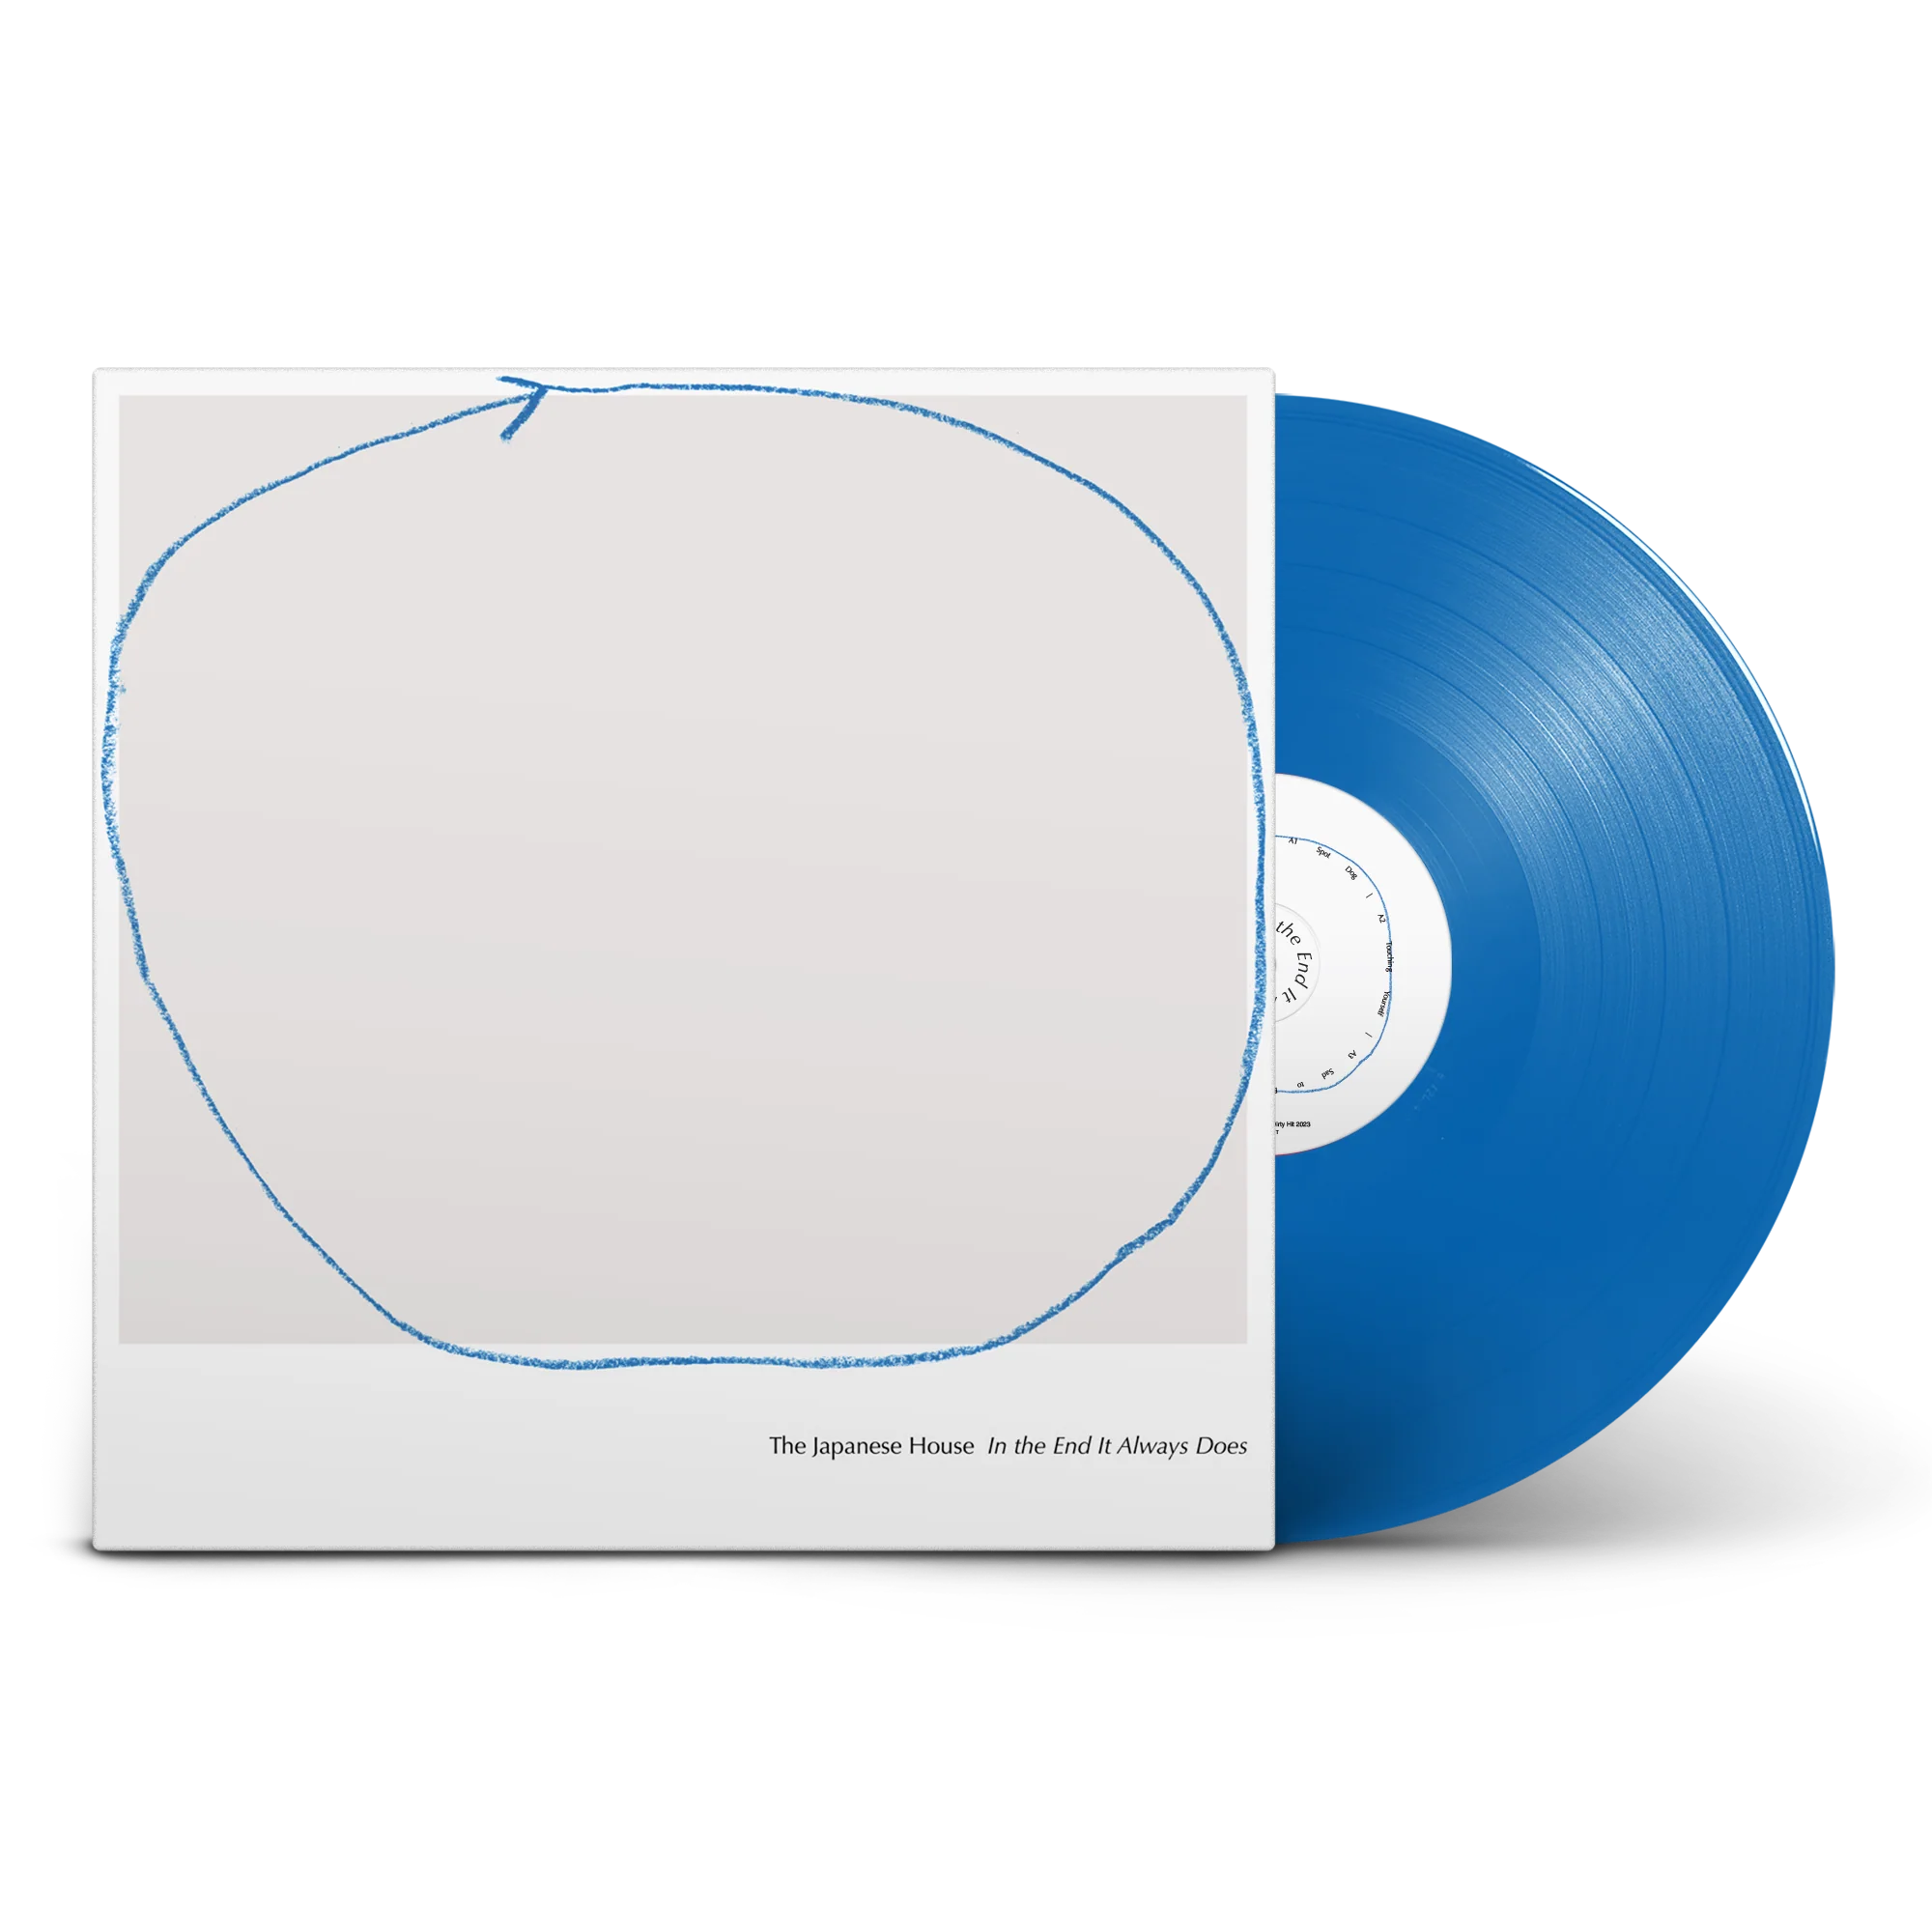 The Japanese House - In the End It Always Does: Limited Edition Cornflower Blue Vinyl LP